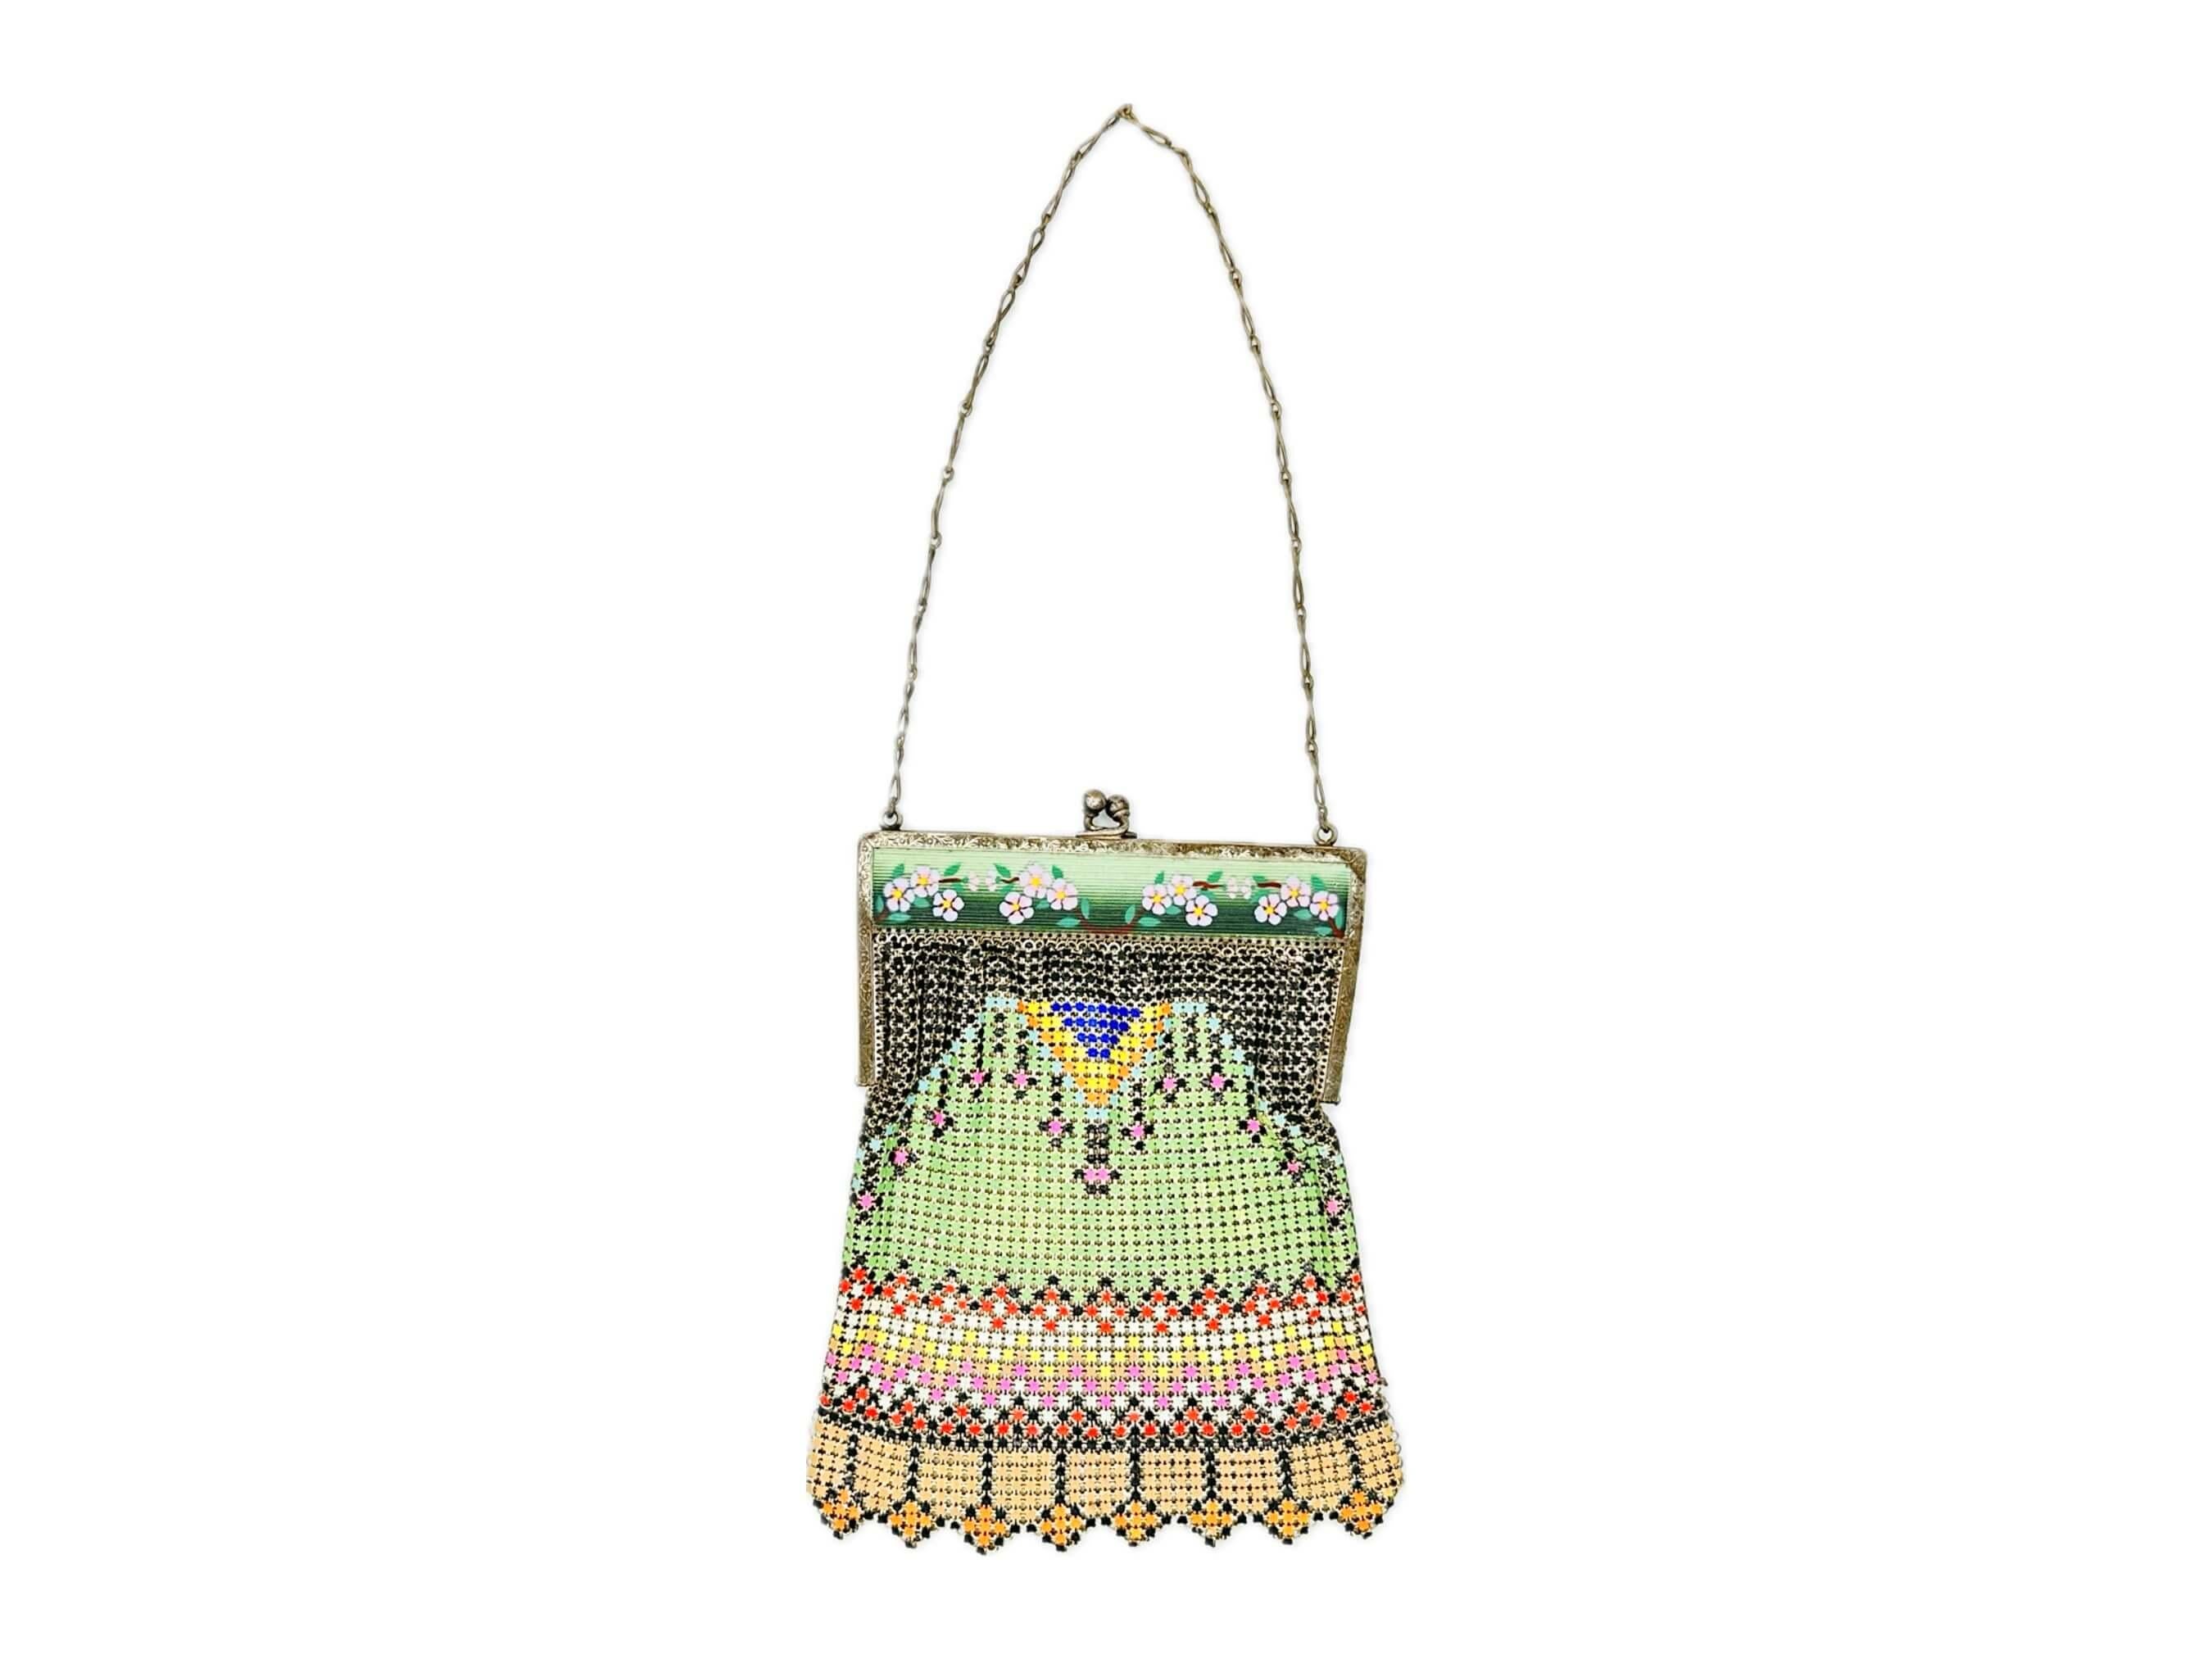 This wonderful Whiting & Davis metal mesh bag, circa 1920s, is a stunning piece of fashion history. The purse is comprised of colorful enameled armor mesh with a unique enameled frame. The front side of the frame is accented with delicate pink